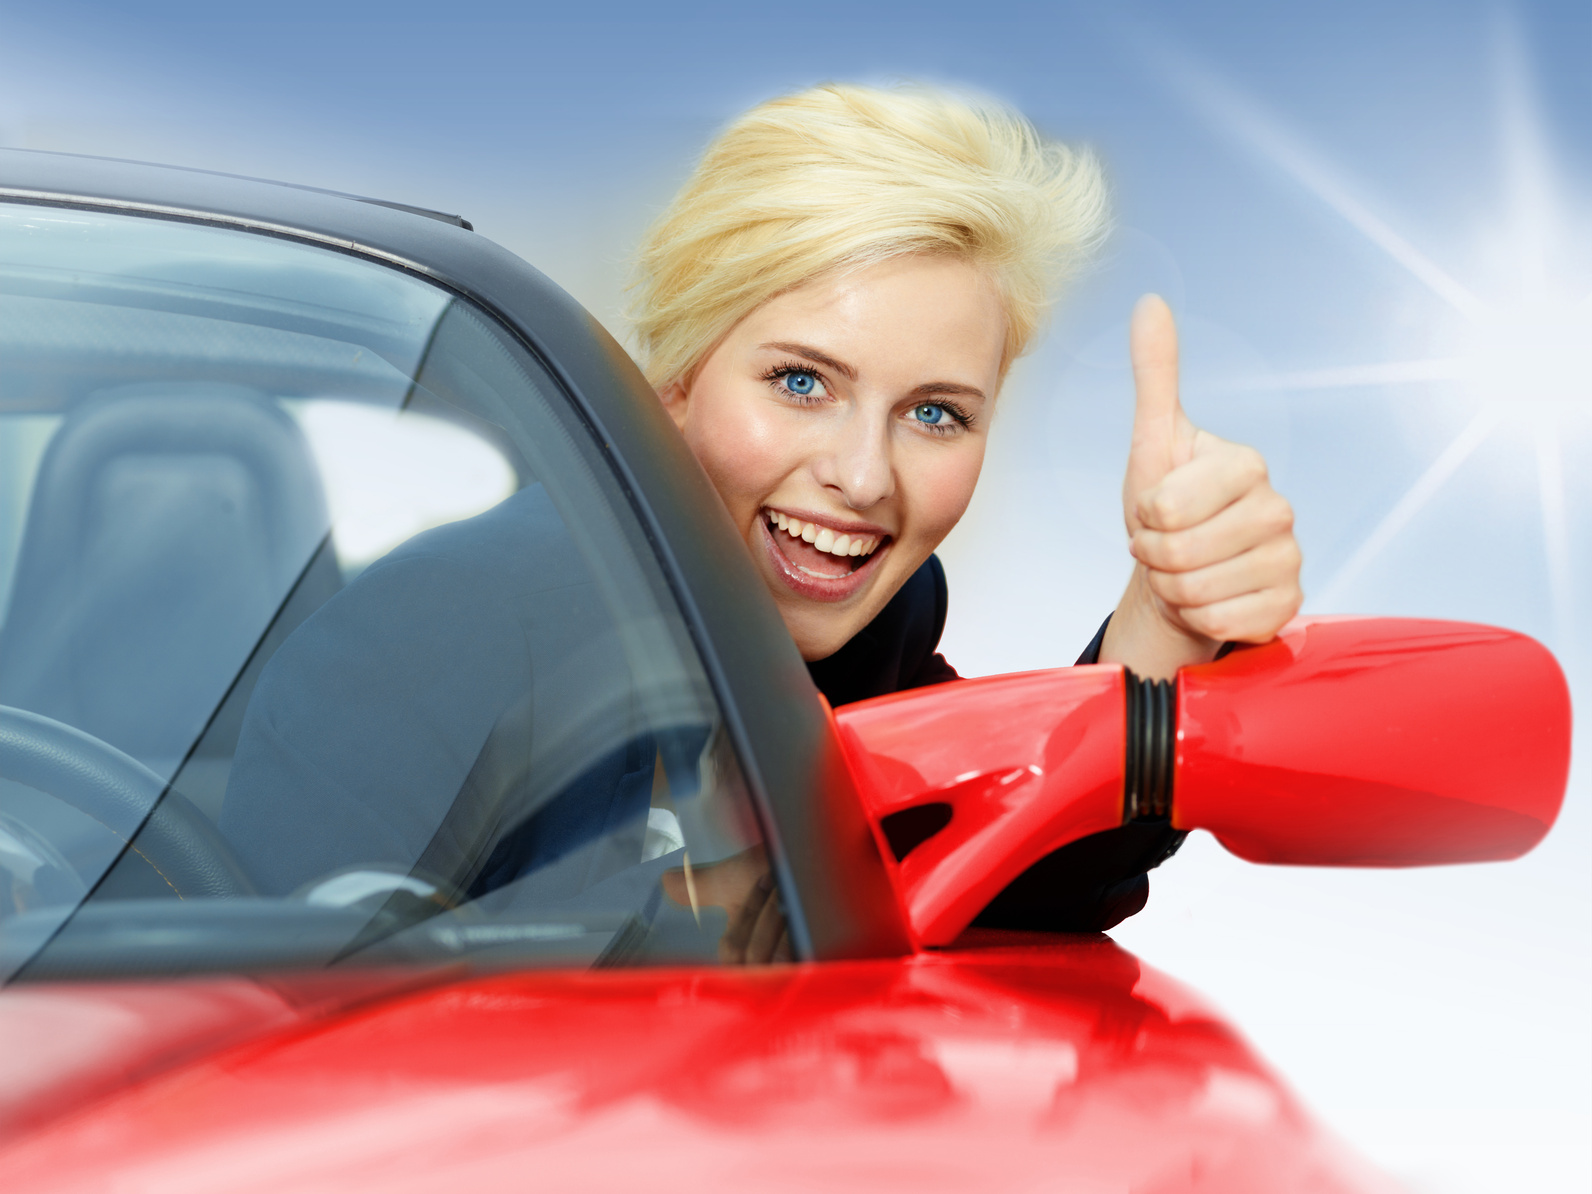 Cheap Car Insurance For Women – 3 Auto Insurance “Secrets” Every Female Driver Should Know